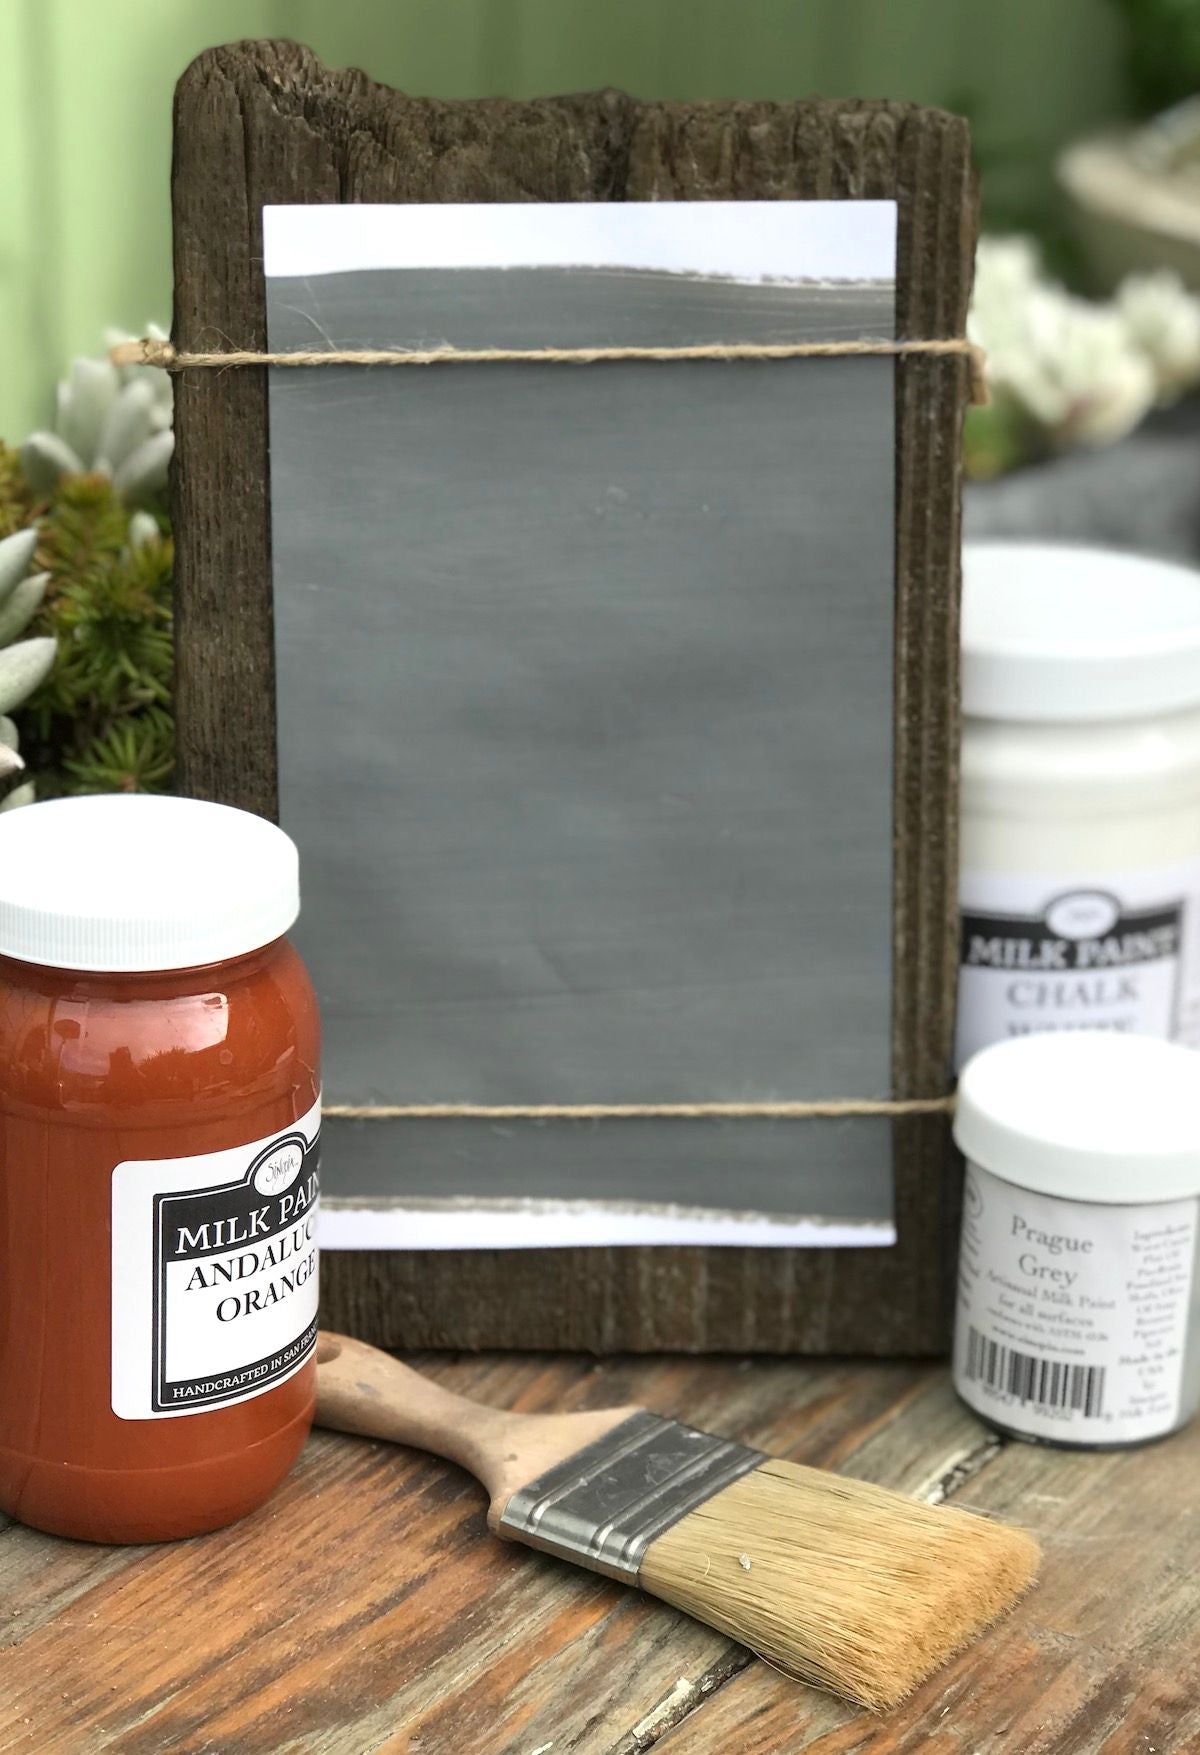 Milk Paint Paynes Gray is available at Natural Art Supplies